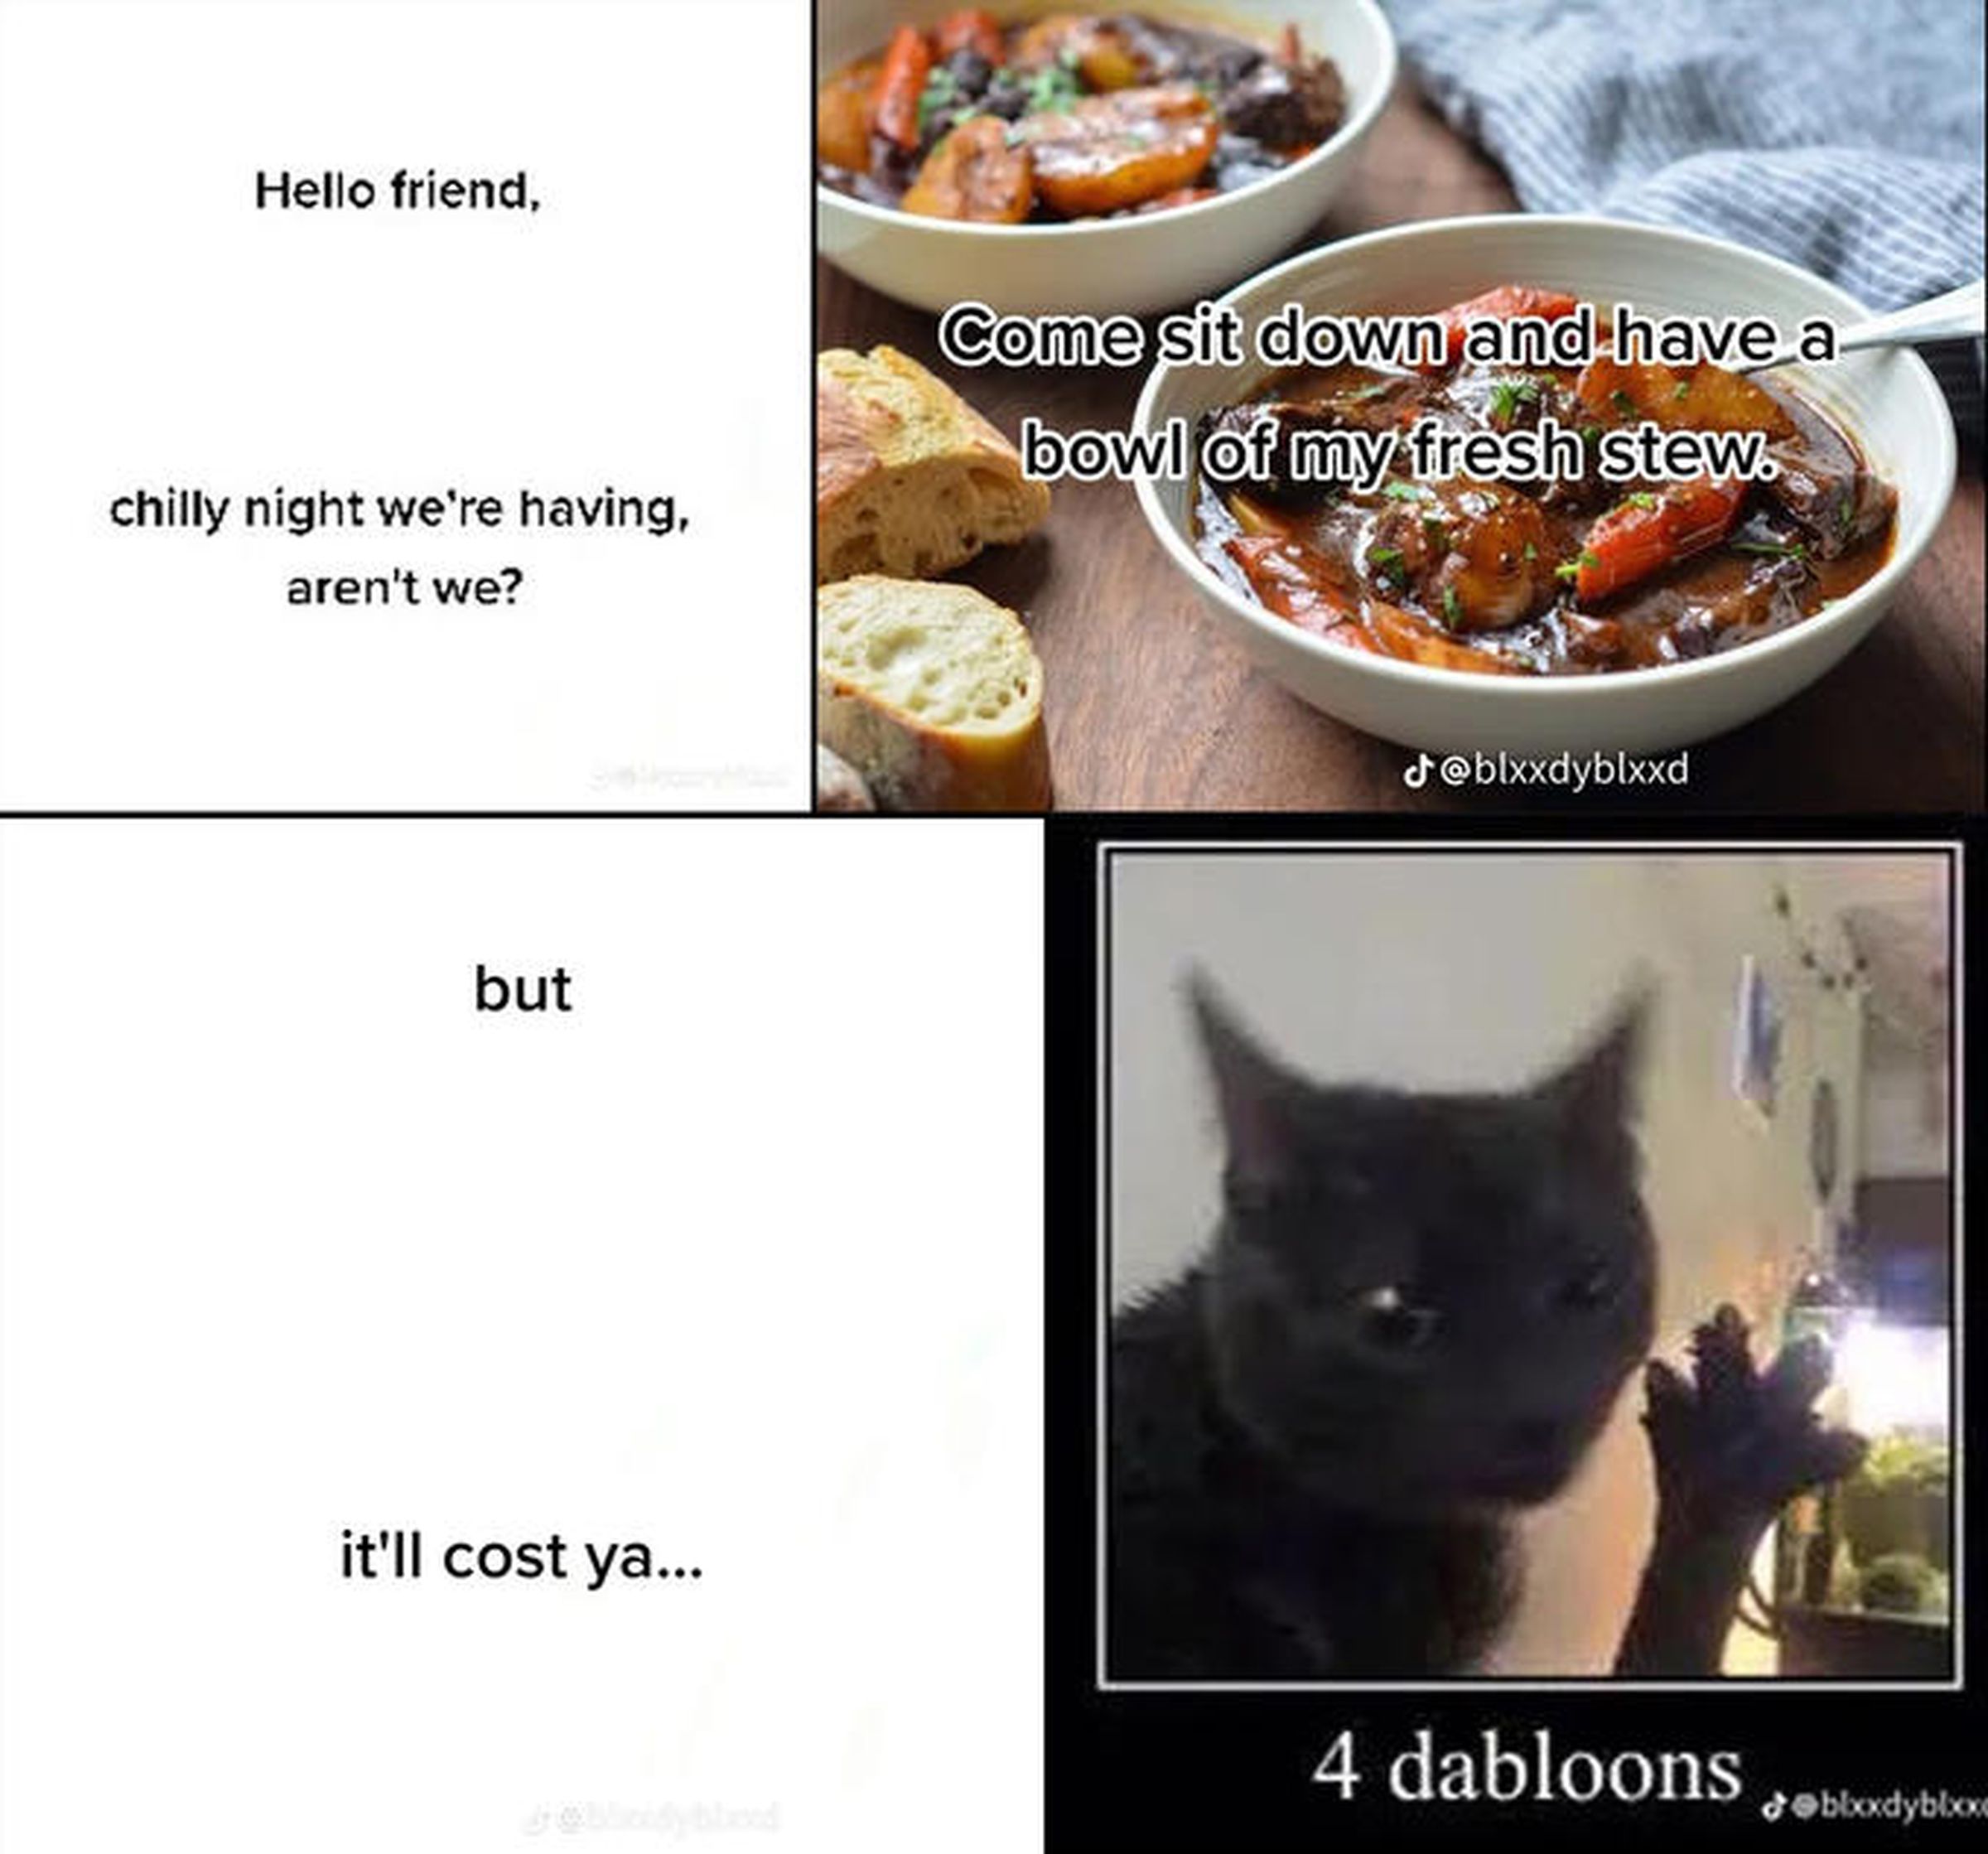 A four-panel meme in which a cat offers the user a stew in exchange for 'dabloons'